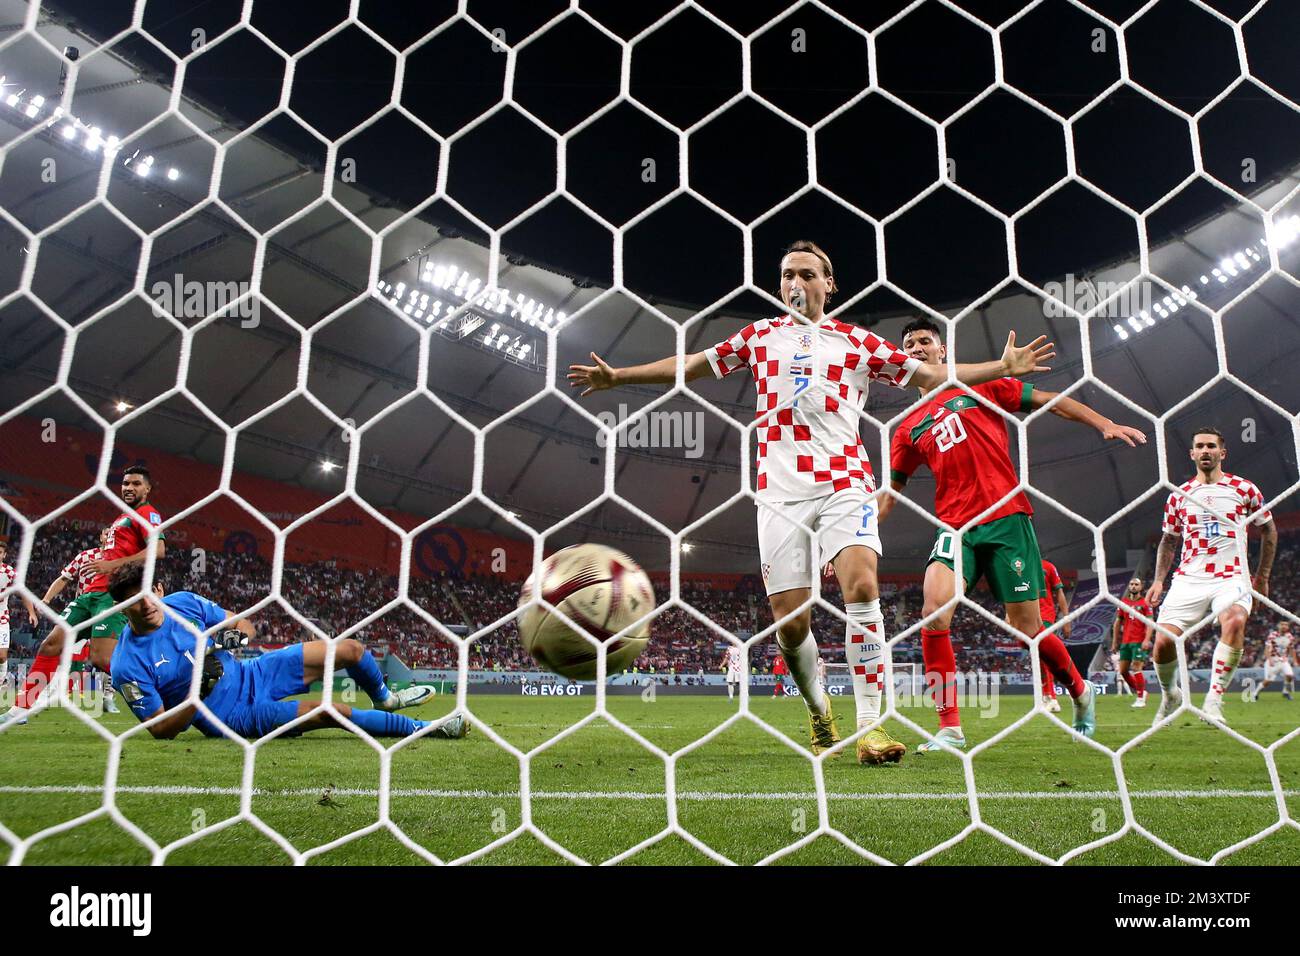 DOHA, QATAR - DECEMBER 17: Mislav Orsic of Croatia ( not pictured)scores a goal during the FIFA World Cup Qatar 2022 3rd Place match between Croatia and Morocco at Khalifa International Stadium on December 17, 2022 in Doha, Qatar. Photo: Goran Stanzl/PIXSELL Credit: Pixsell/Alamy Live News Stock Photo